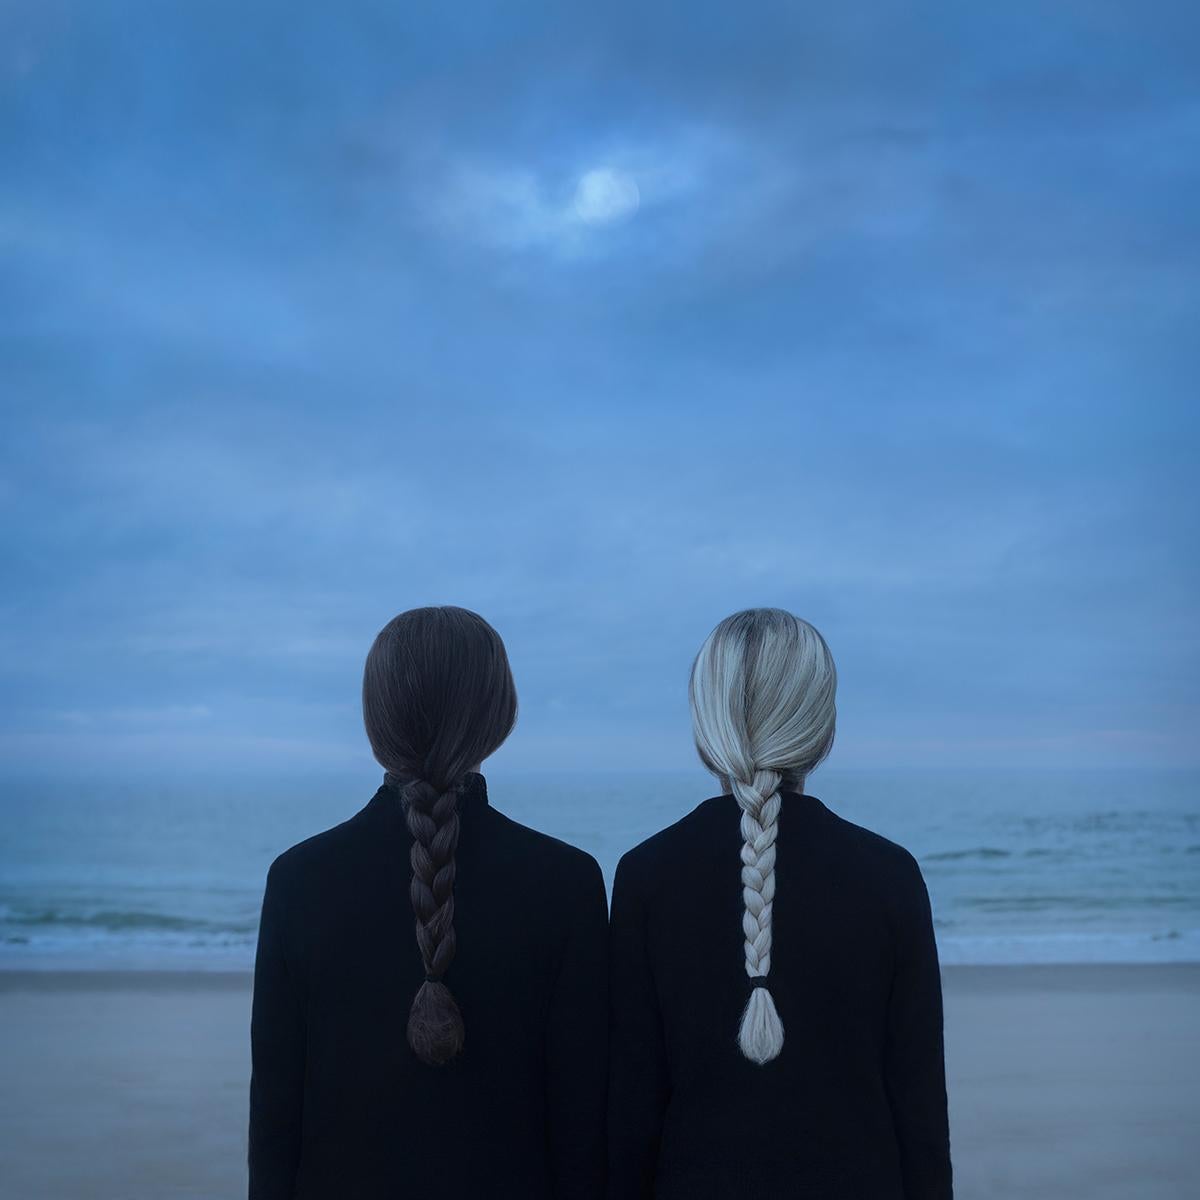 Gabriel Isak Color Photograph – Discovery at night – Farbfotografie